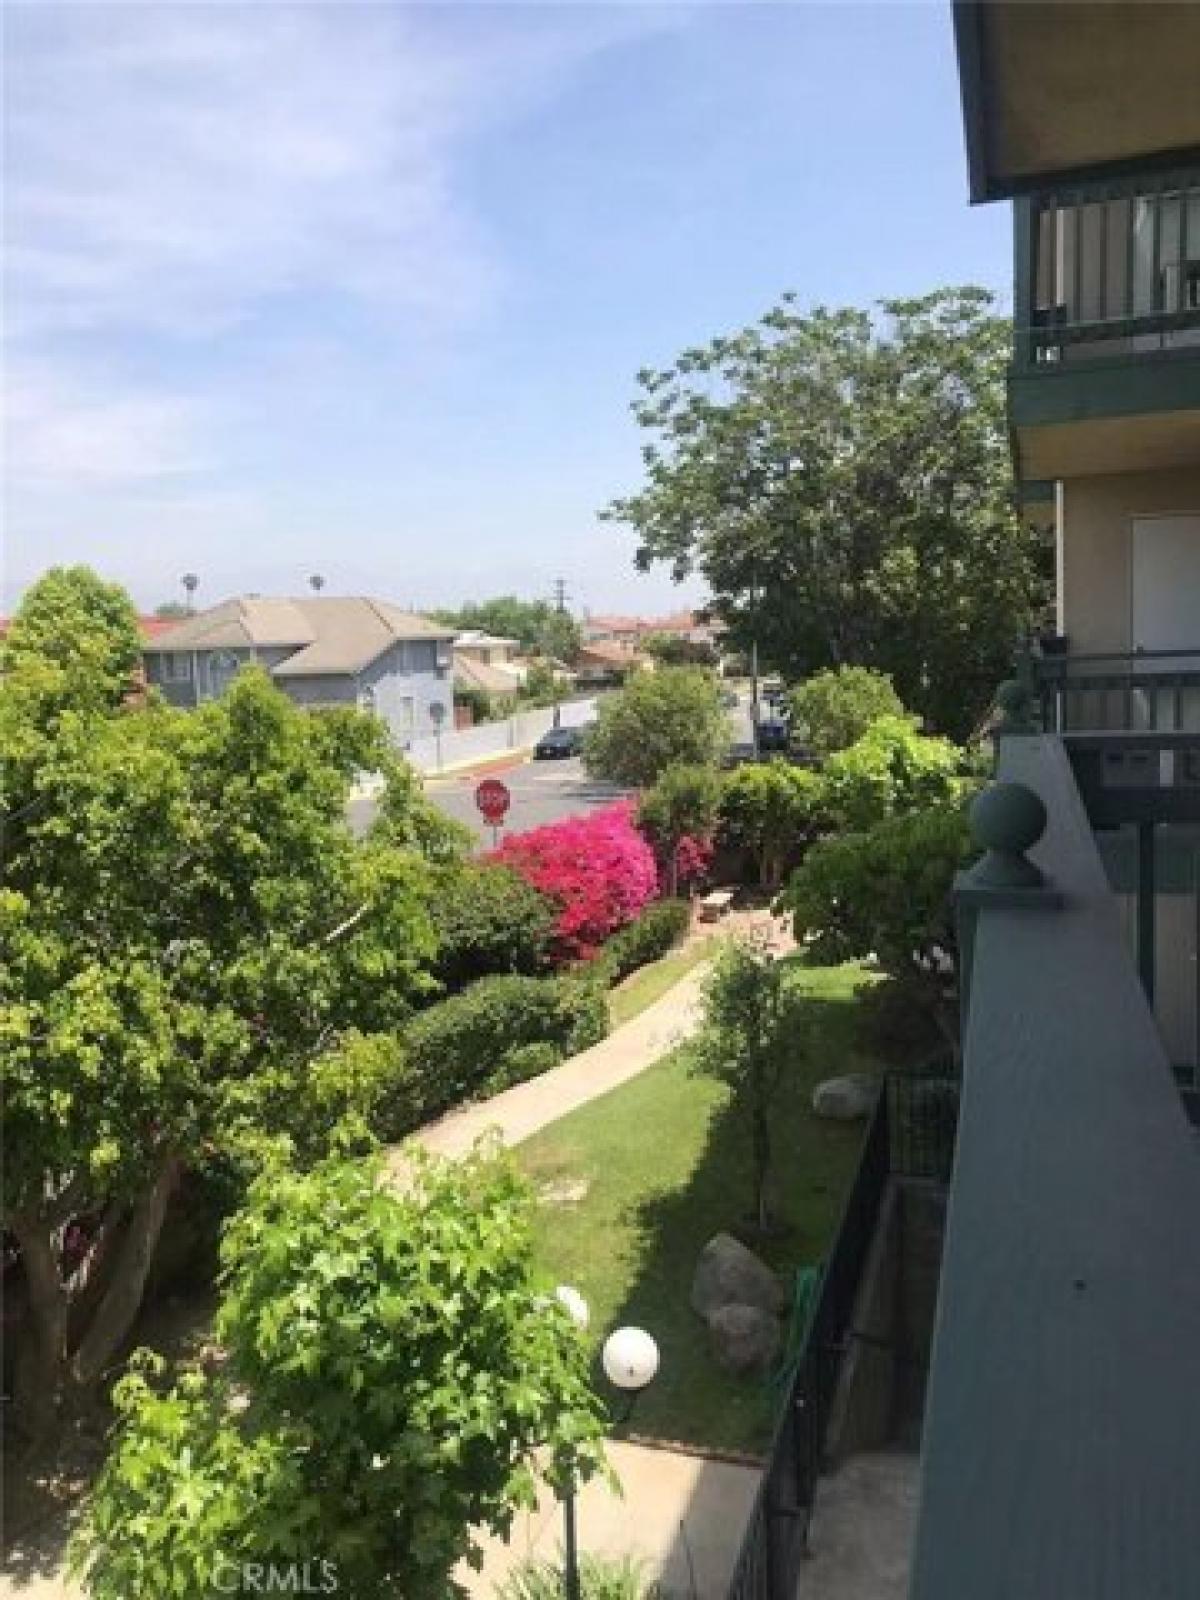 Picture of Home For Rent in Monterey Park, California, United States